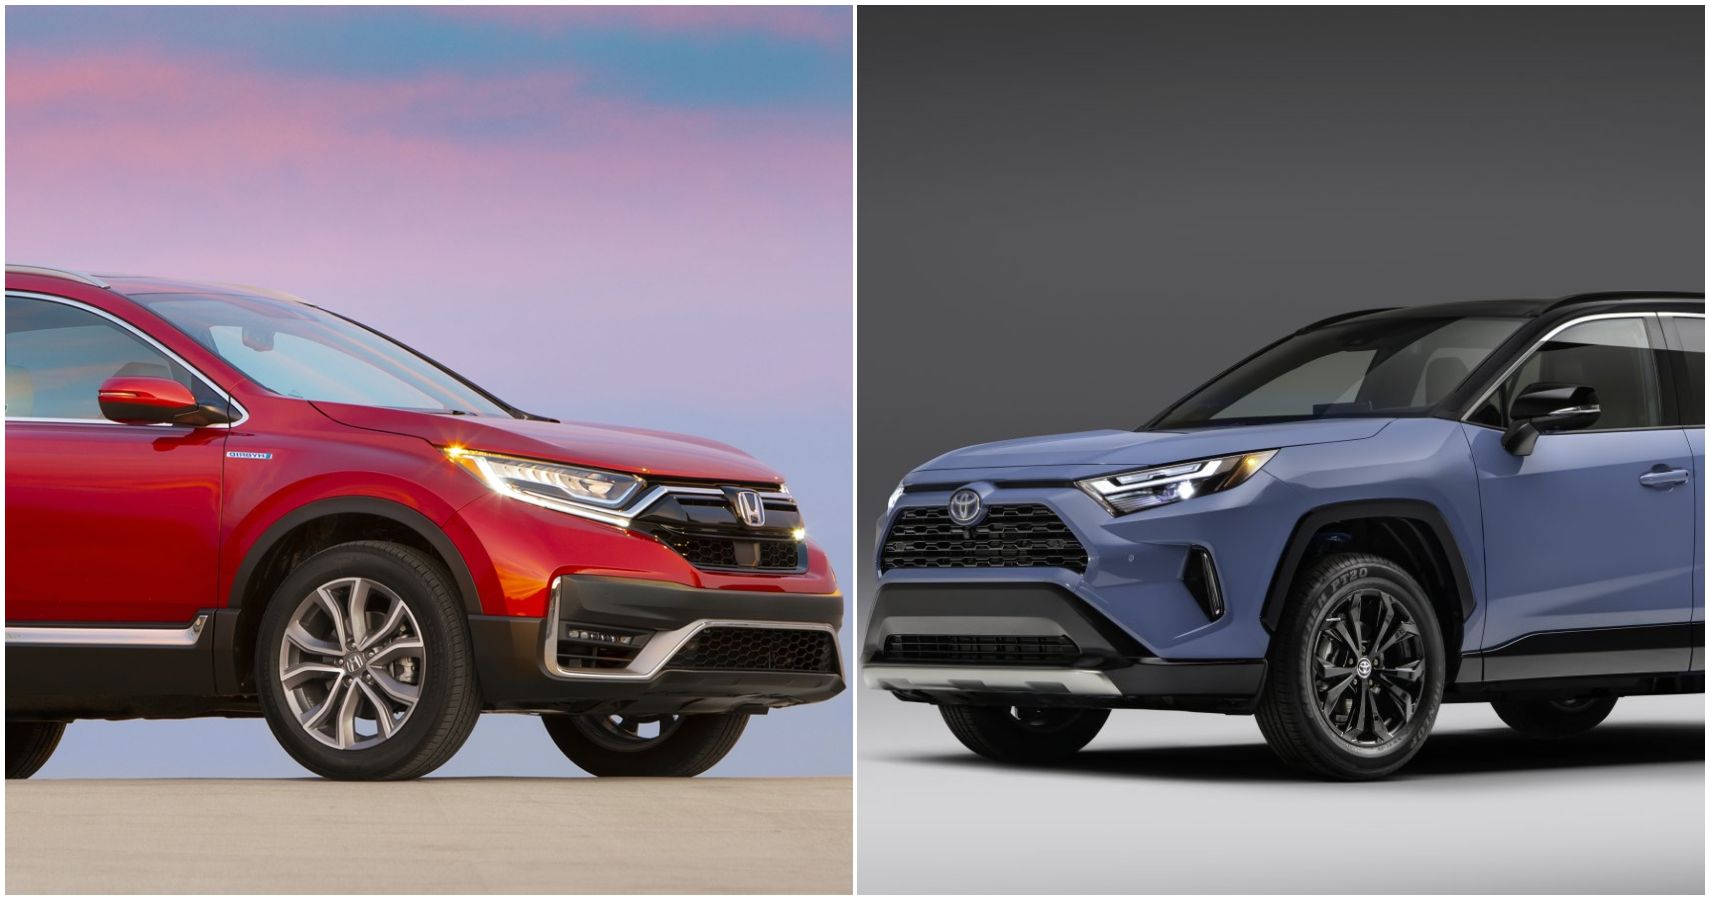 A Collage Of 2022 Honda CR-V And A 2022 Toyota RAV4